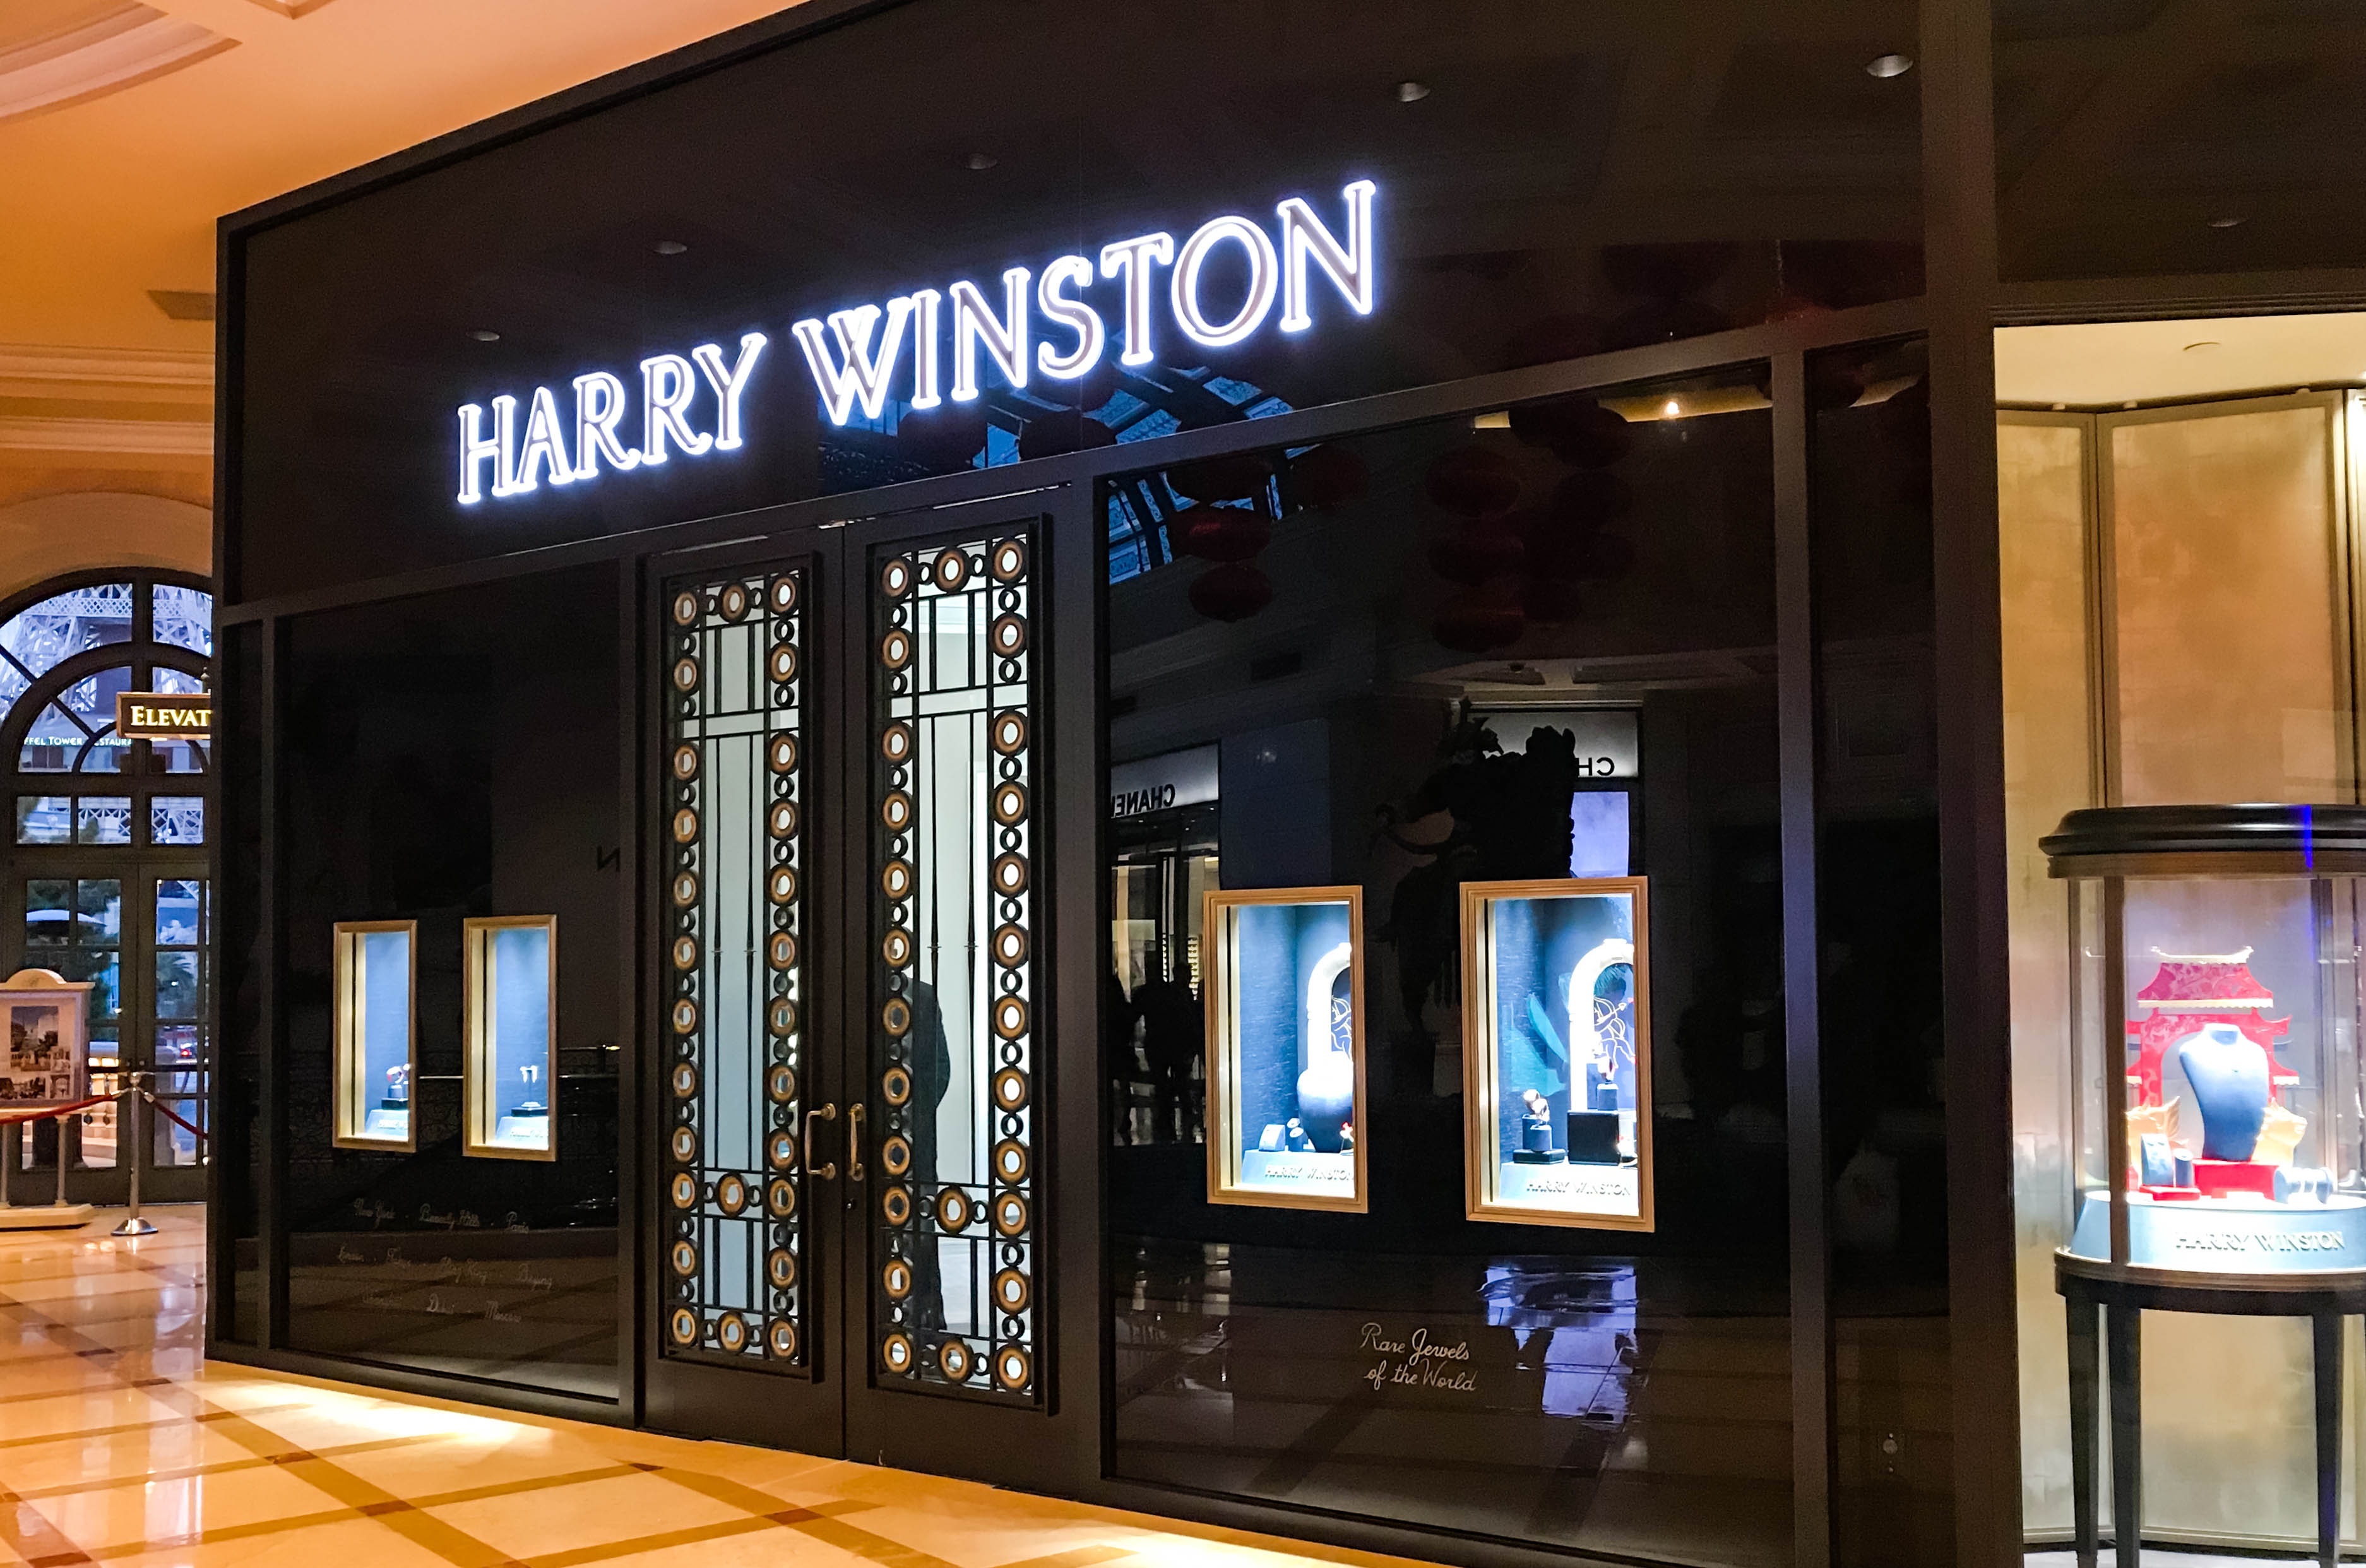 Harry Winston's eighth retail salon in China is located in Hangzhou Photo: Shutterstock